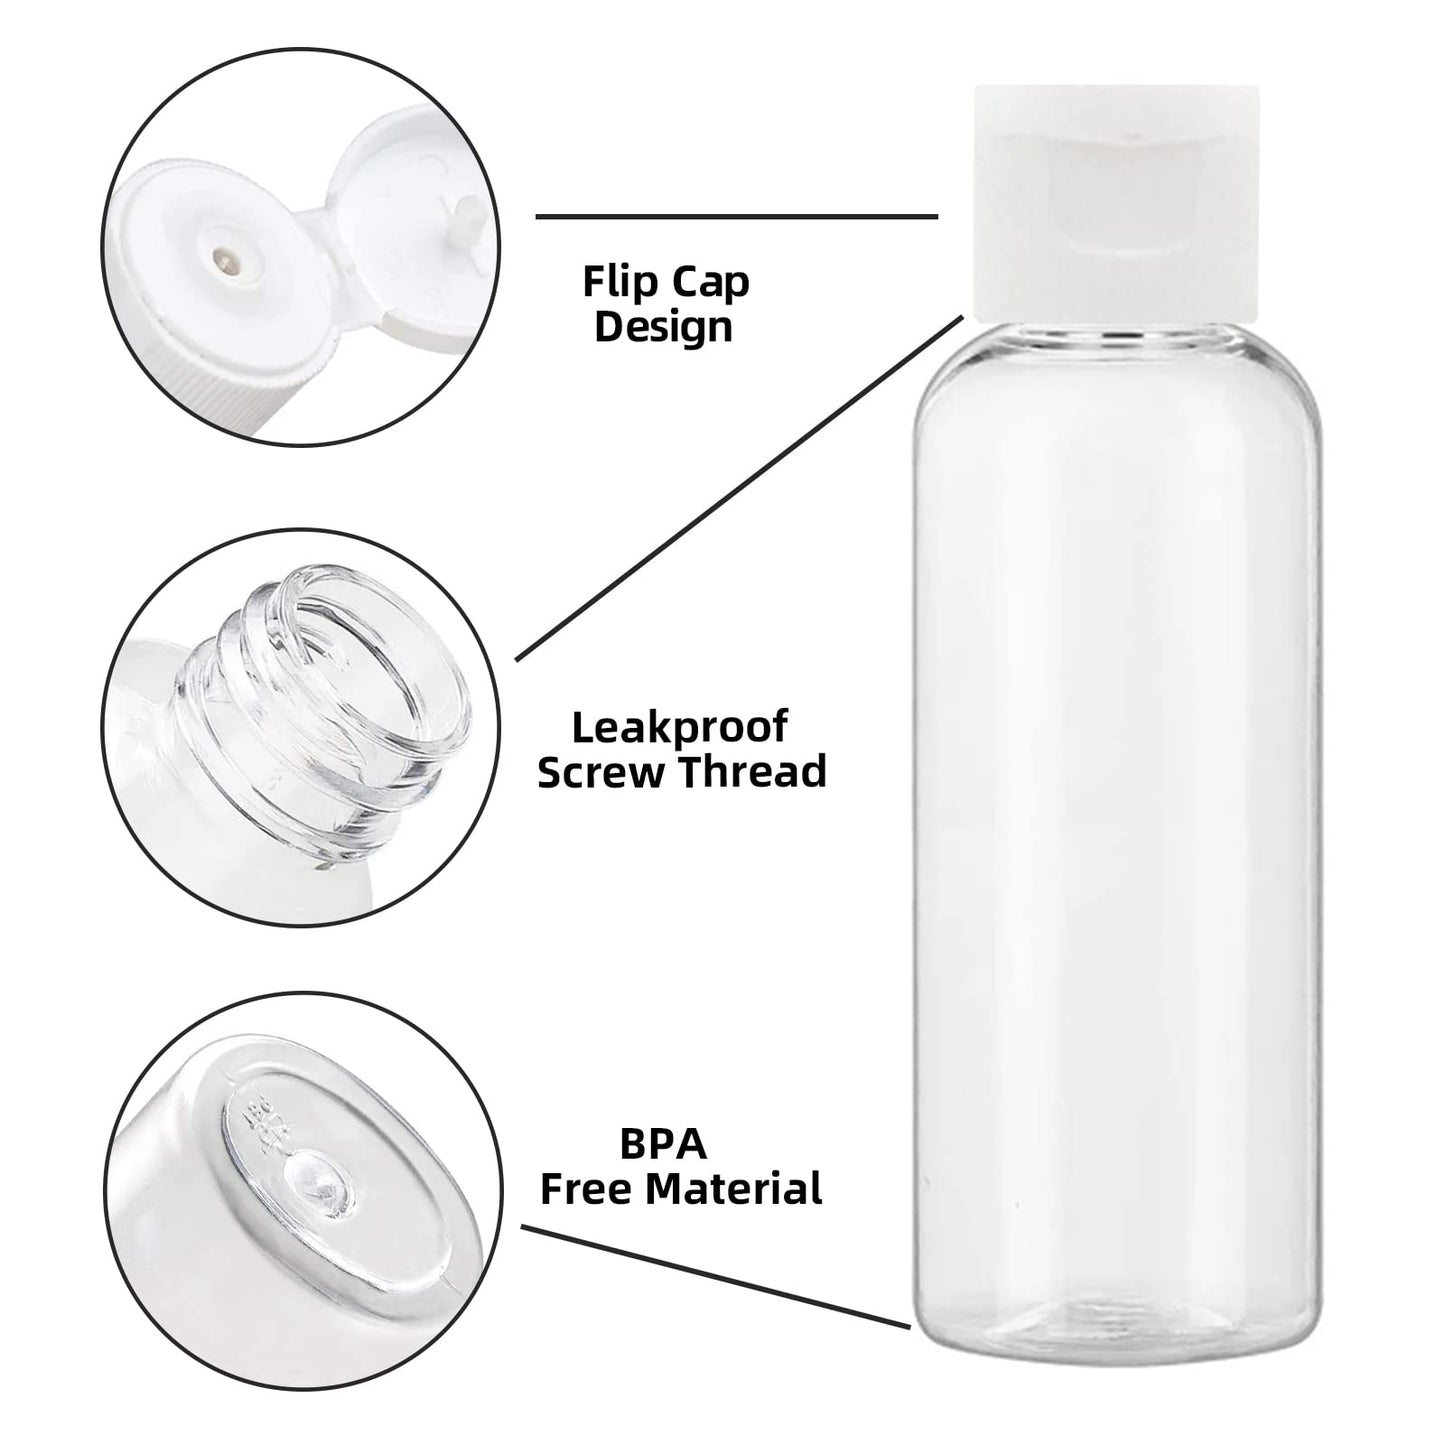 2 Oz Plastic Containers with Lids, Clear Travel Bottles for Toiletries Shampoo Refillable Travel Containers - Set of 25